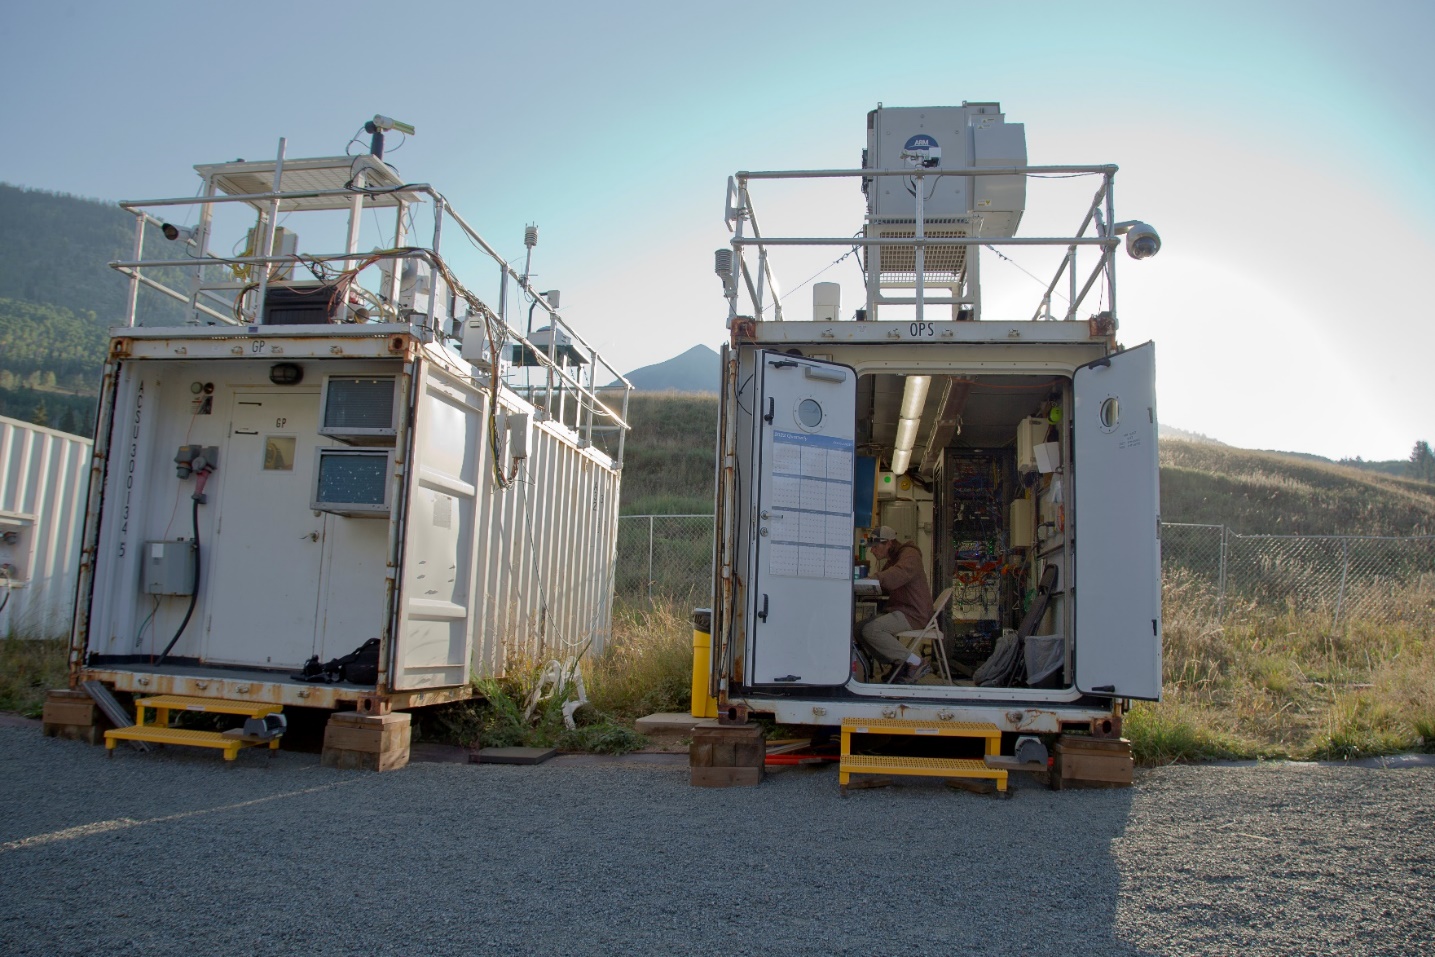 A technician sits at a desk inside an ARM Mobile Facility container.